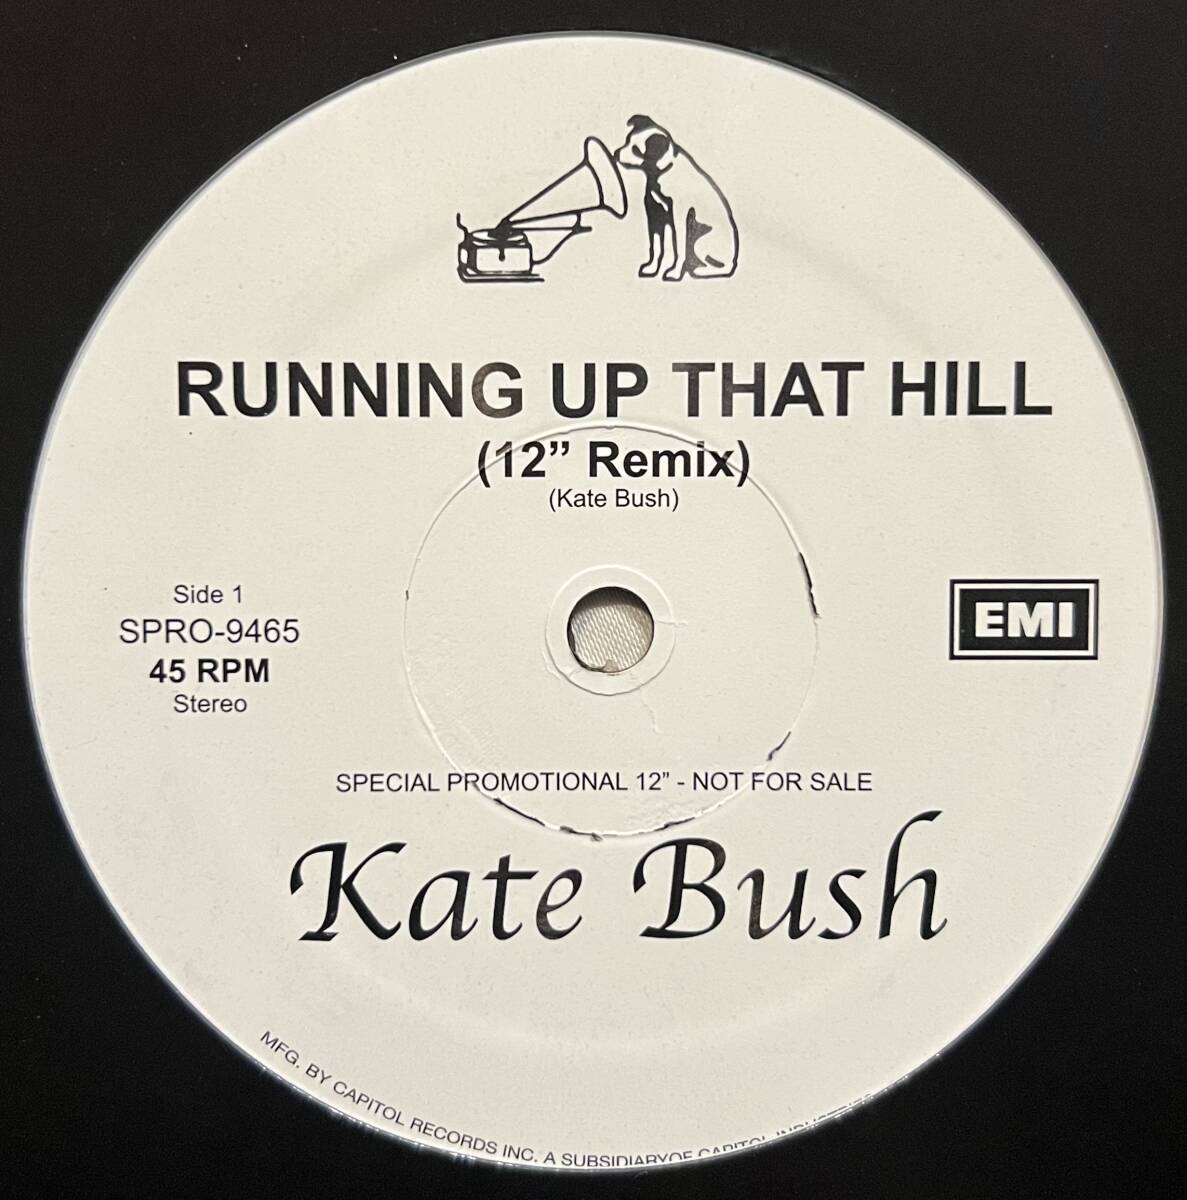 Kate Bush - Running Up That Hill remixes Ashley Beedle edit Orlando Voorn Downtempo mix_画像1